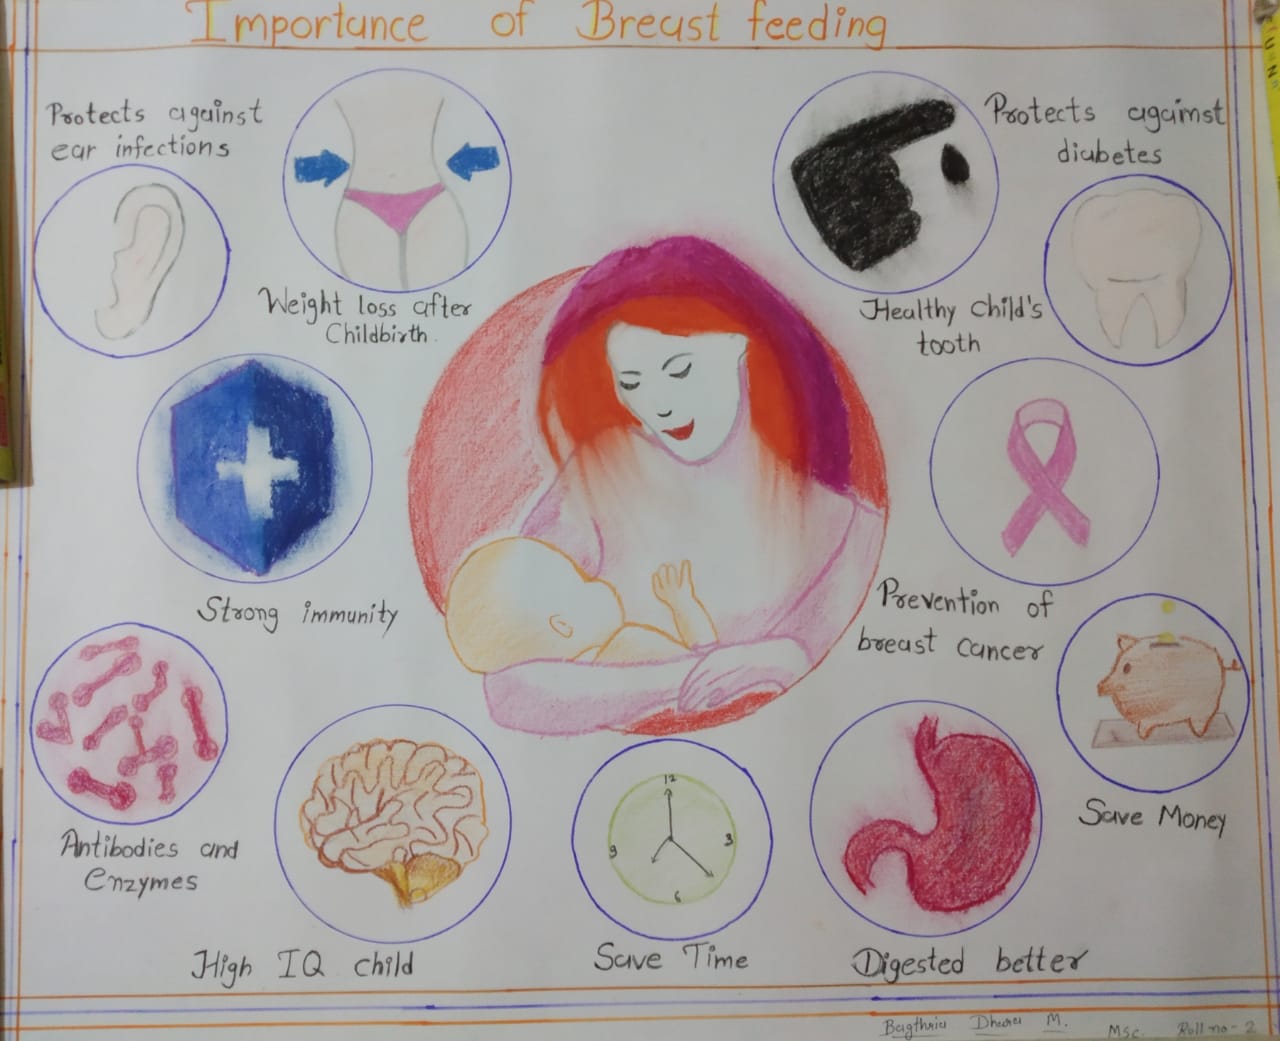 World Breastfeeding Week” Poster Competition